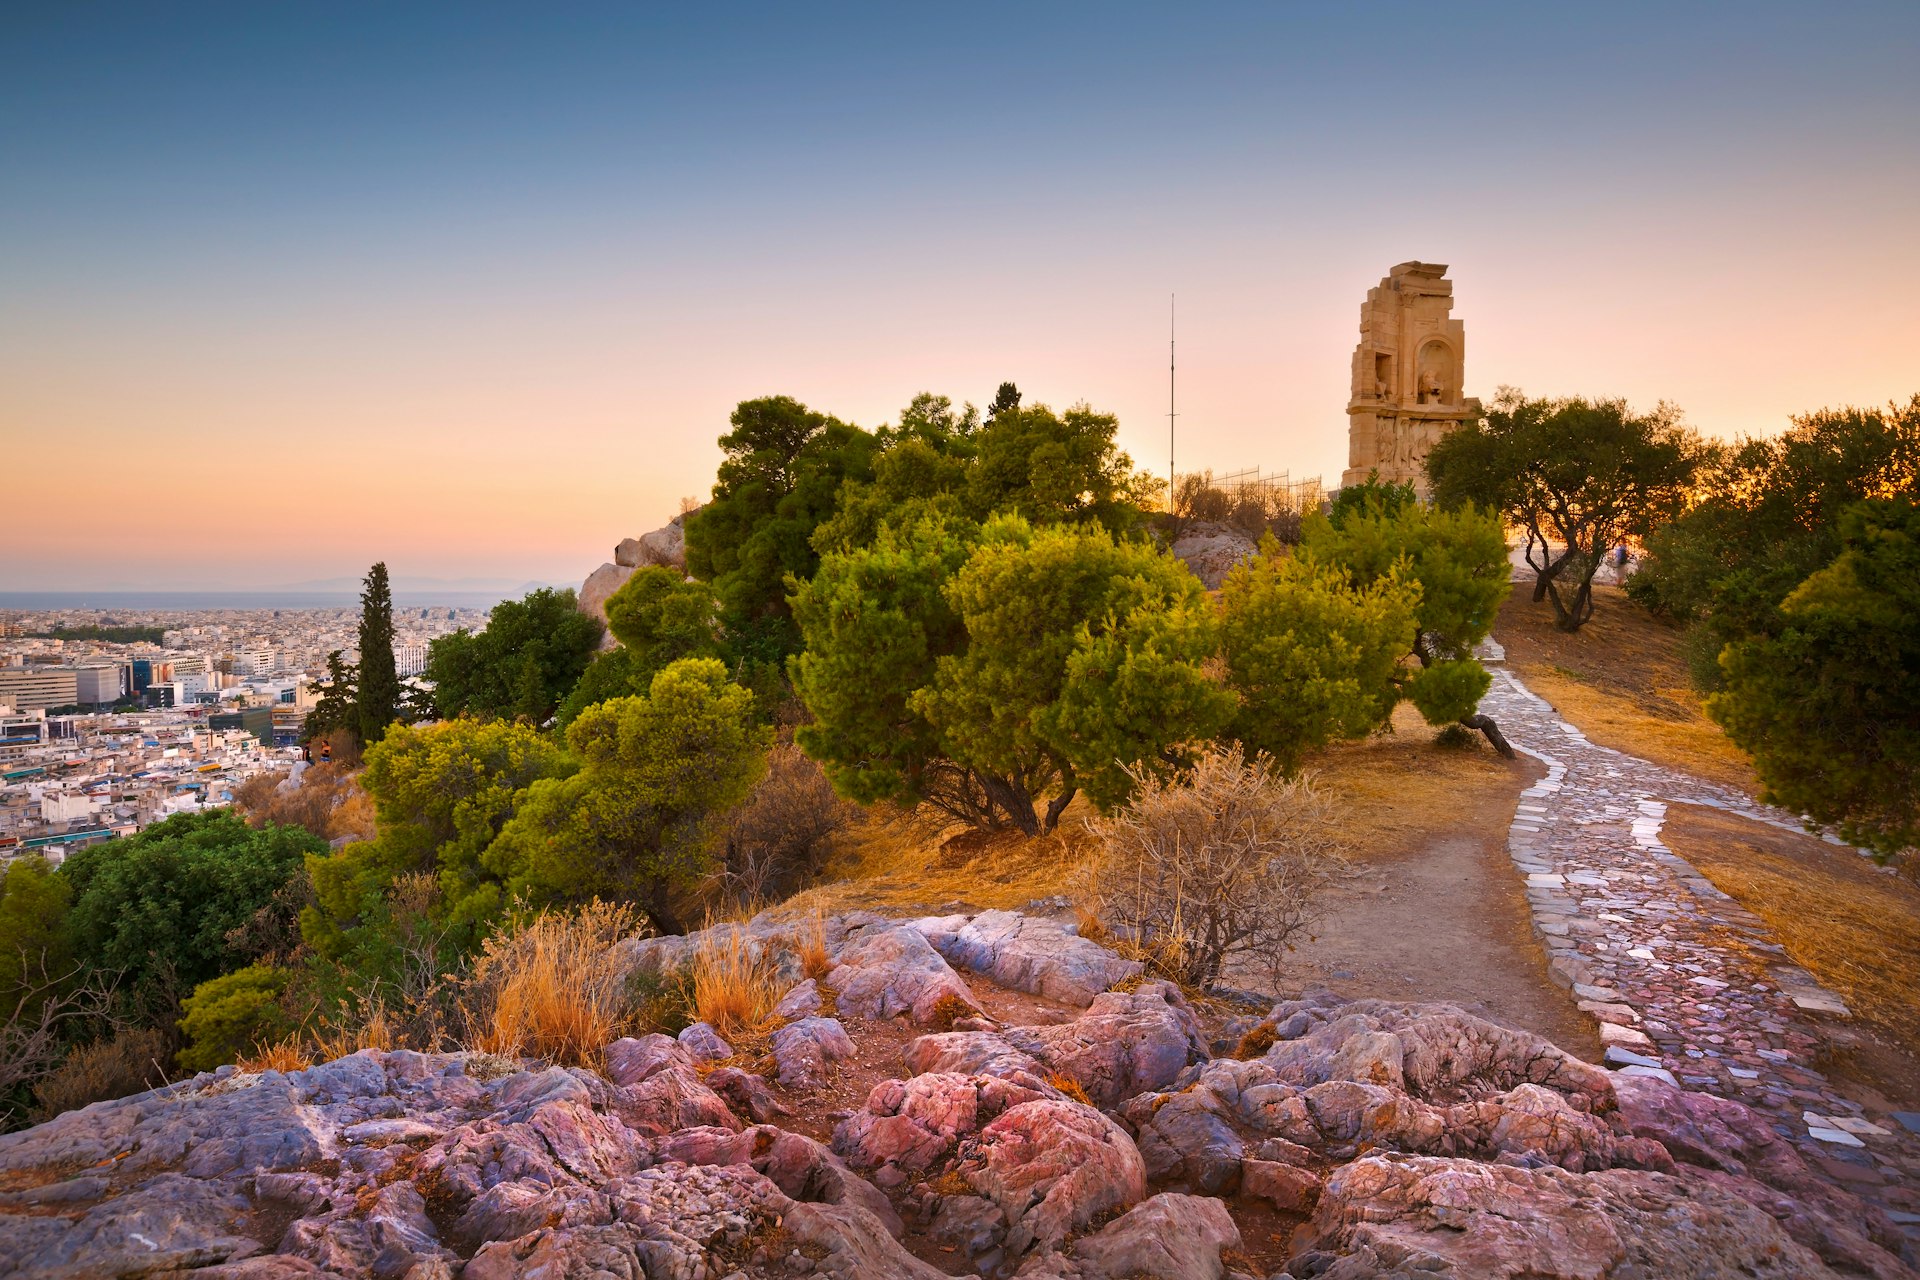 The Philopappos Monument stands among the olive trees of Filopappou Hill with views out across the Athens cityscape